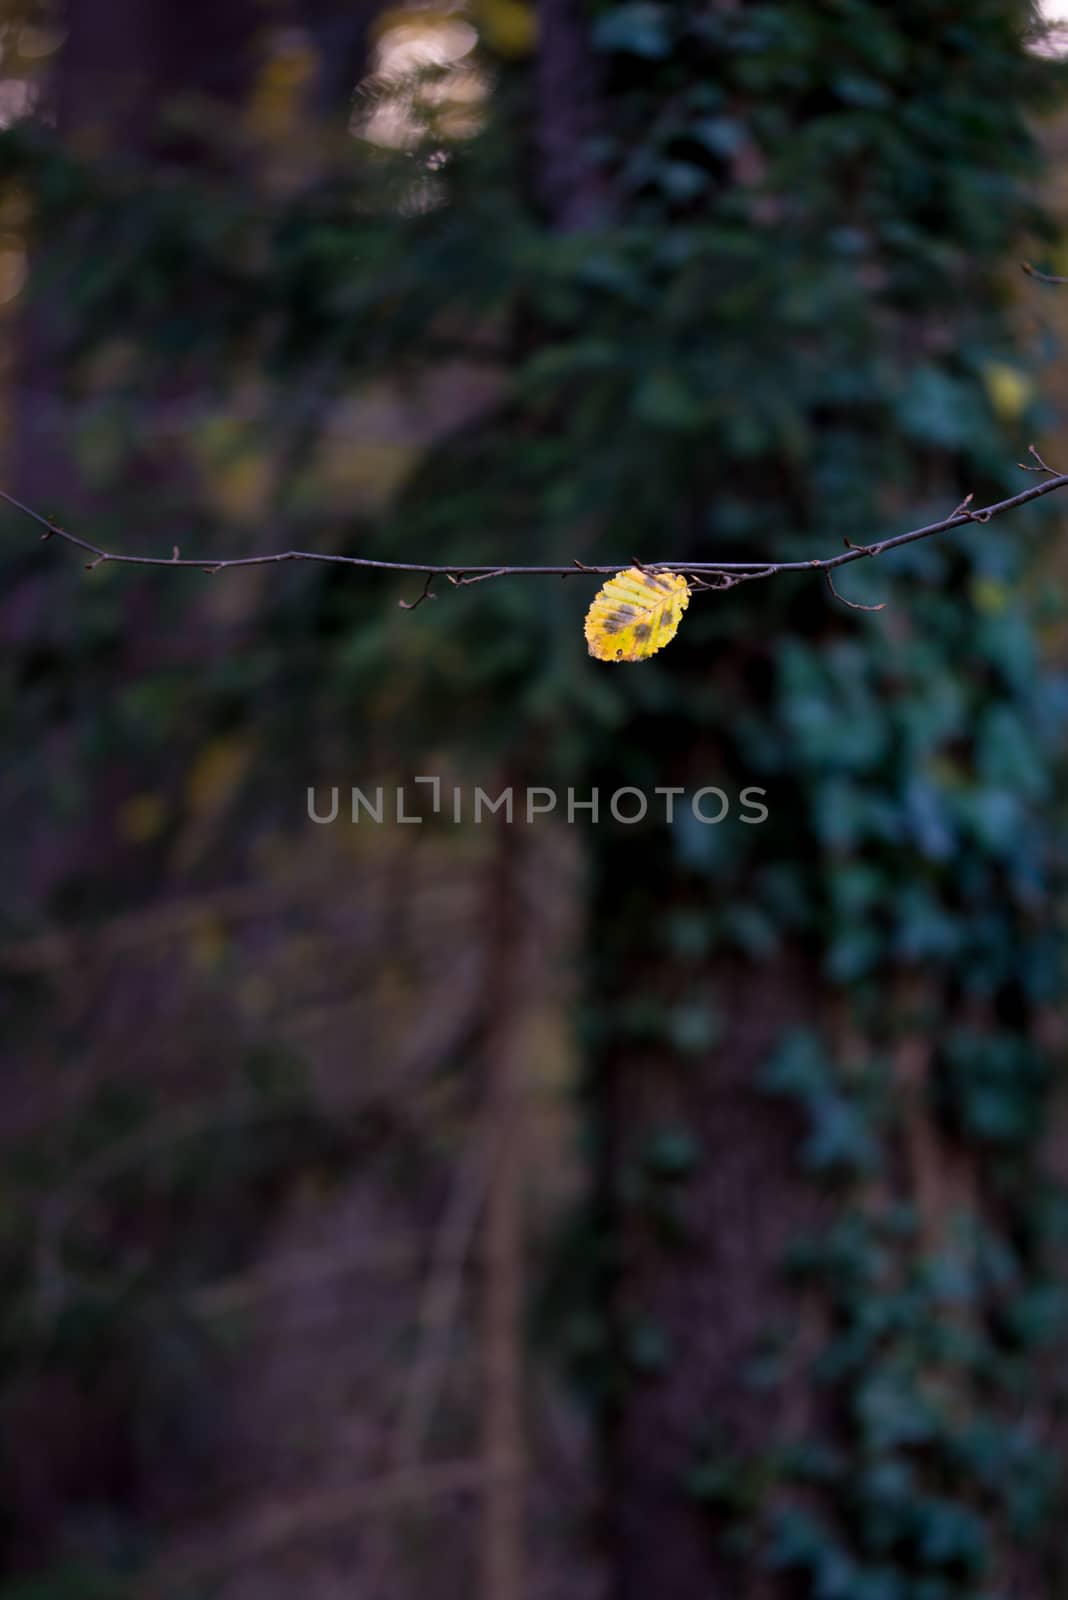 Yellow Alder leaf on branch in front of dark autumn woods background of ivy climbing an oak tree